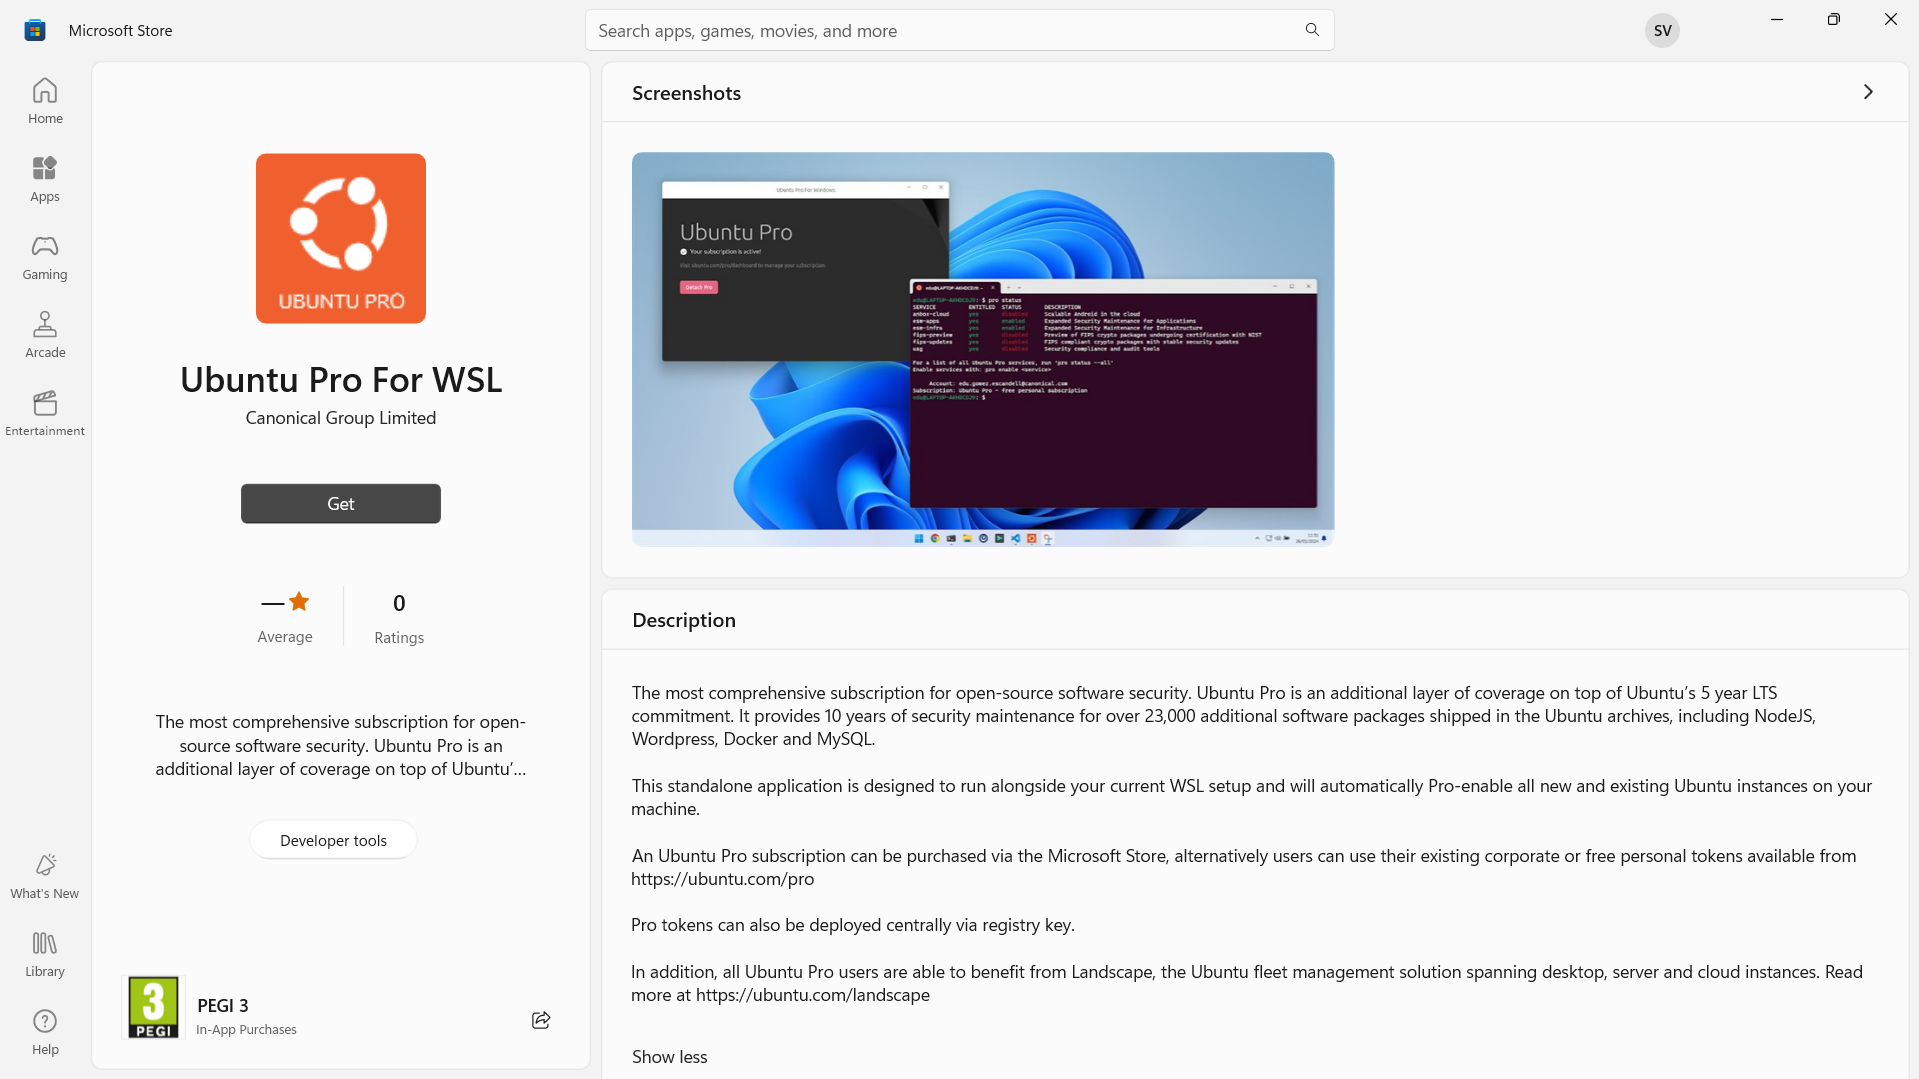 Install Ubuntu Pro for WSL from the Store